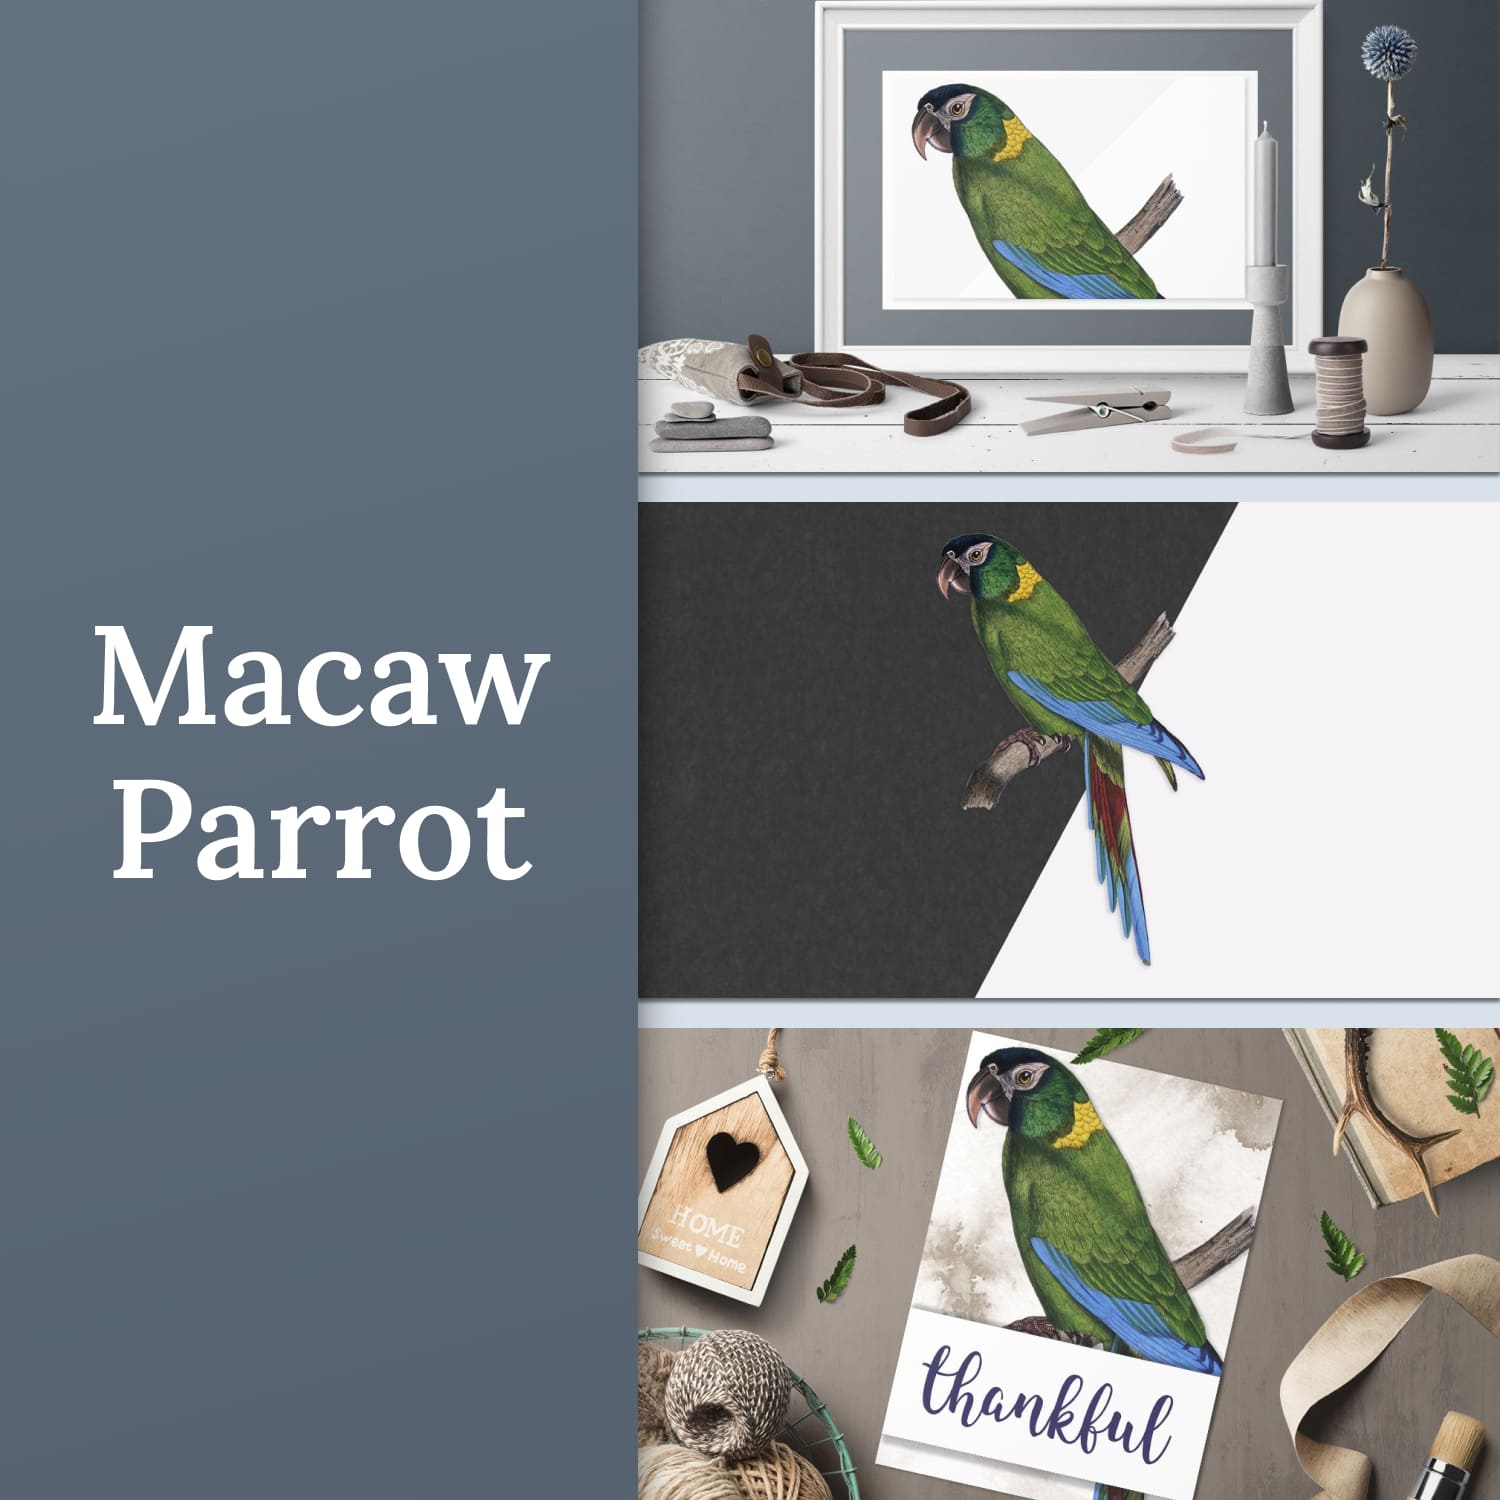 Parrot macaw parrot - main image preview.